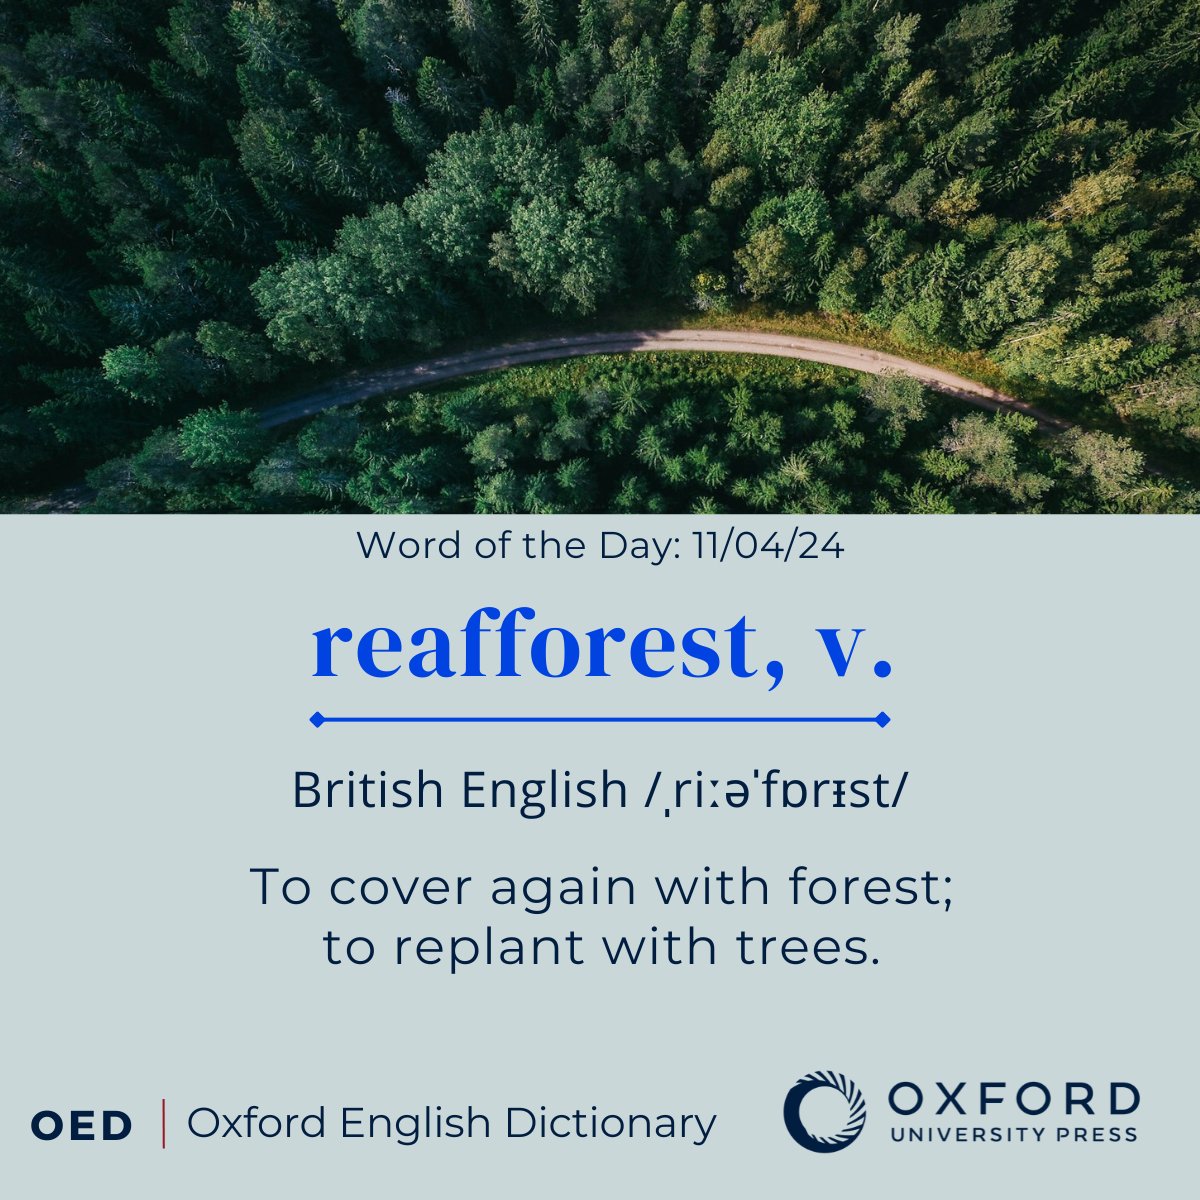 OED #WordOfTheDay: reafforest, v. To cover again with forest; to replant with trees. View the OED entry: oxford.ly/3vFw3y3